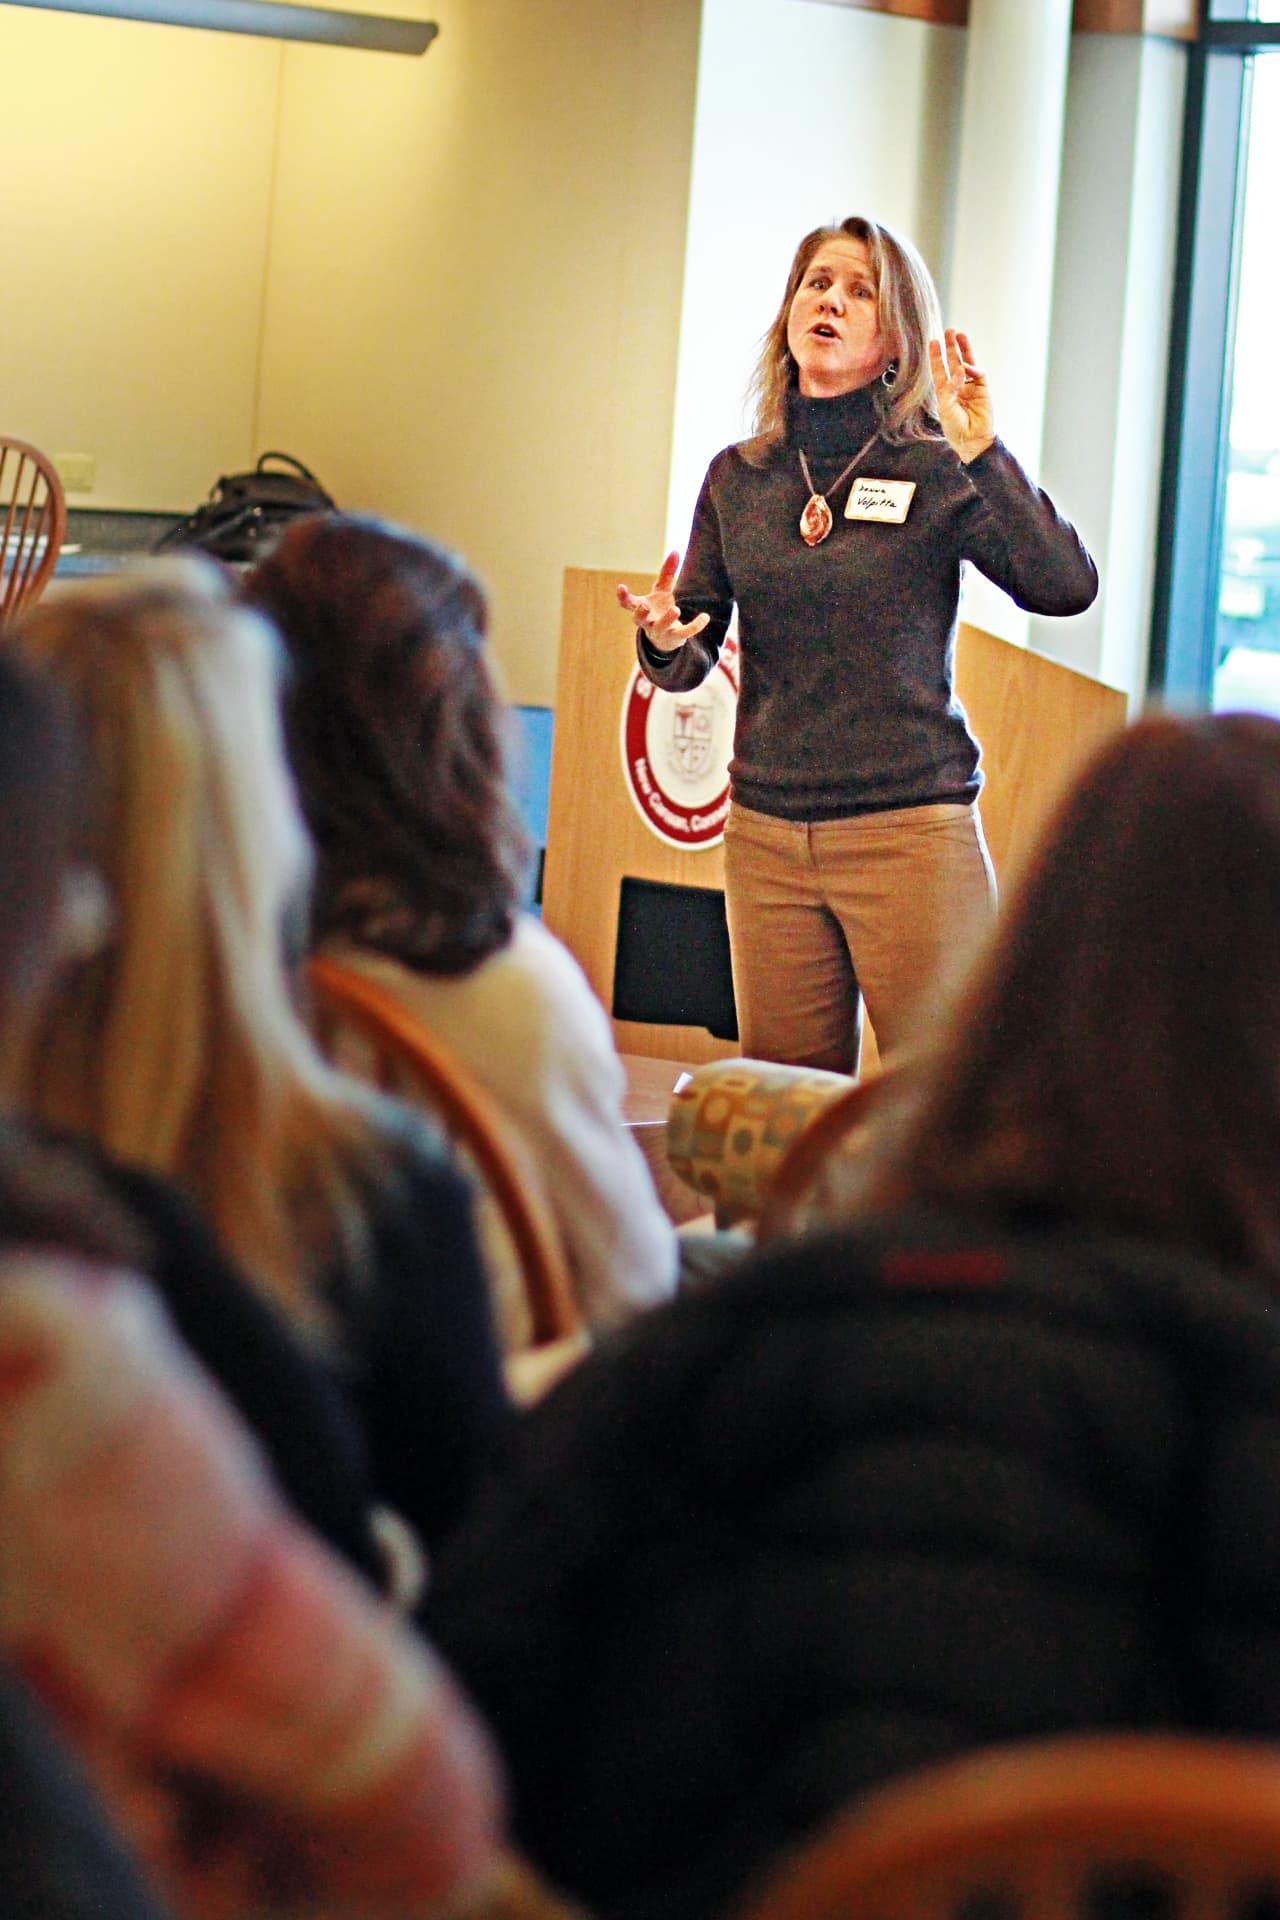 Pound Ridge's Donna Volpitta, author and parent at St. Luke's in New Canaan, recently spoke at the Parents Association's "Spread the Word" event.